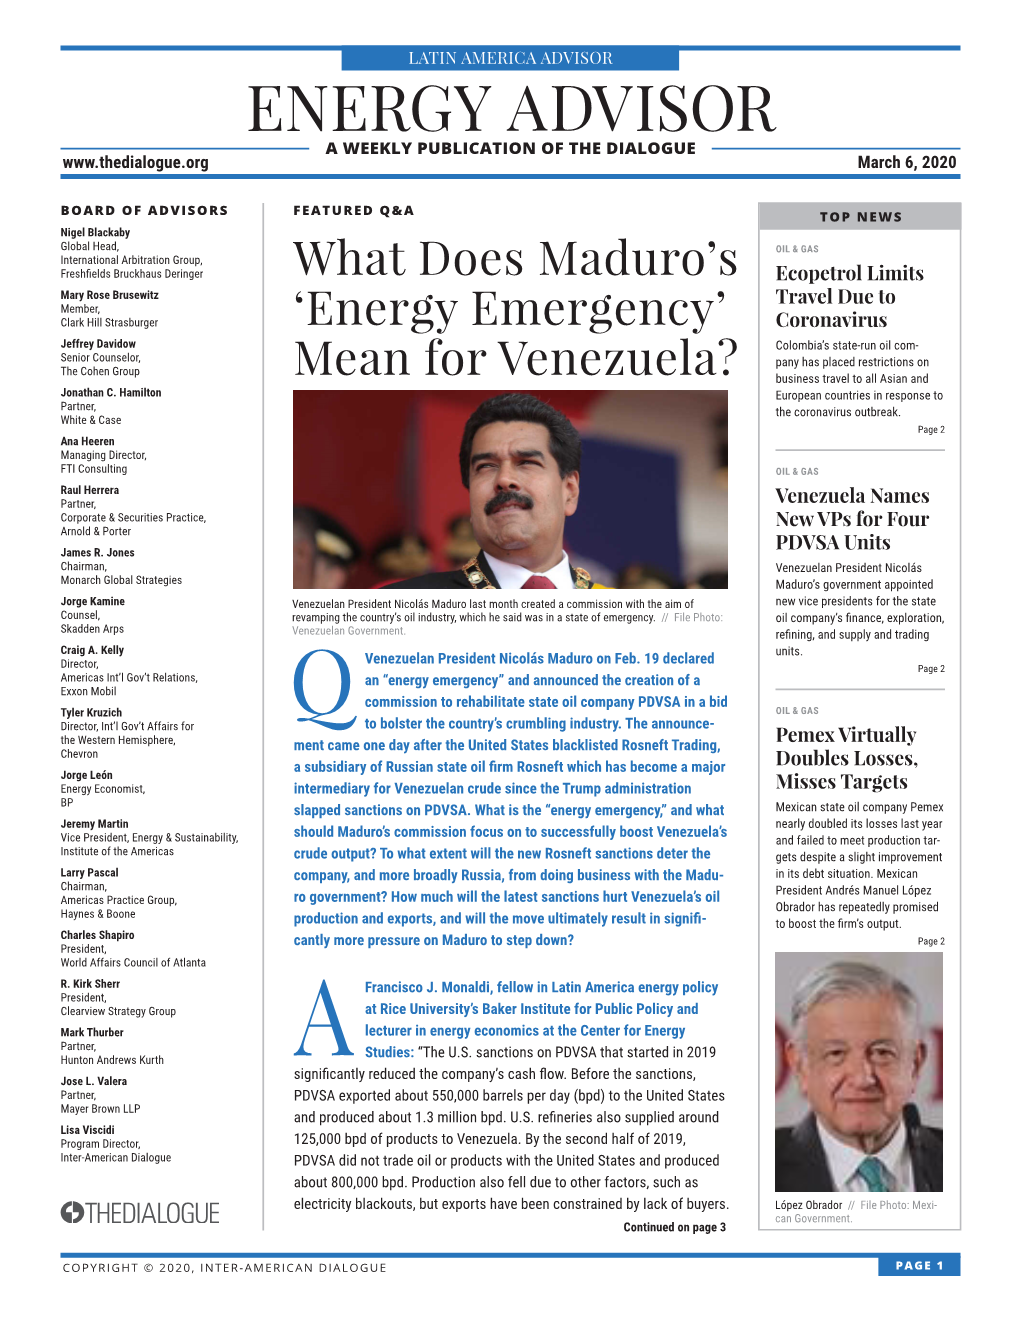 ENERGY ADVISOR a WEEKLY PUBLICATION of the DIALOGUE March 6, 2020